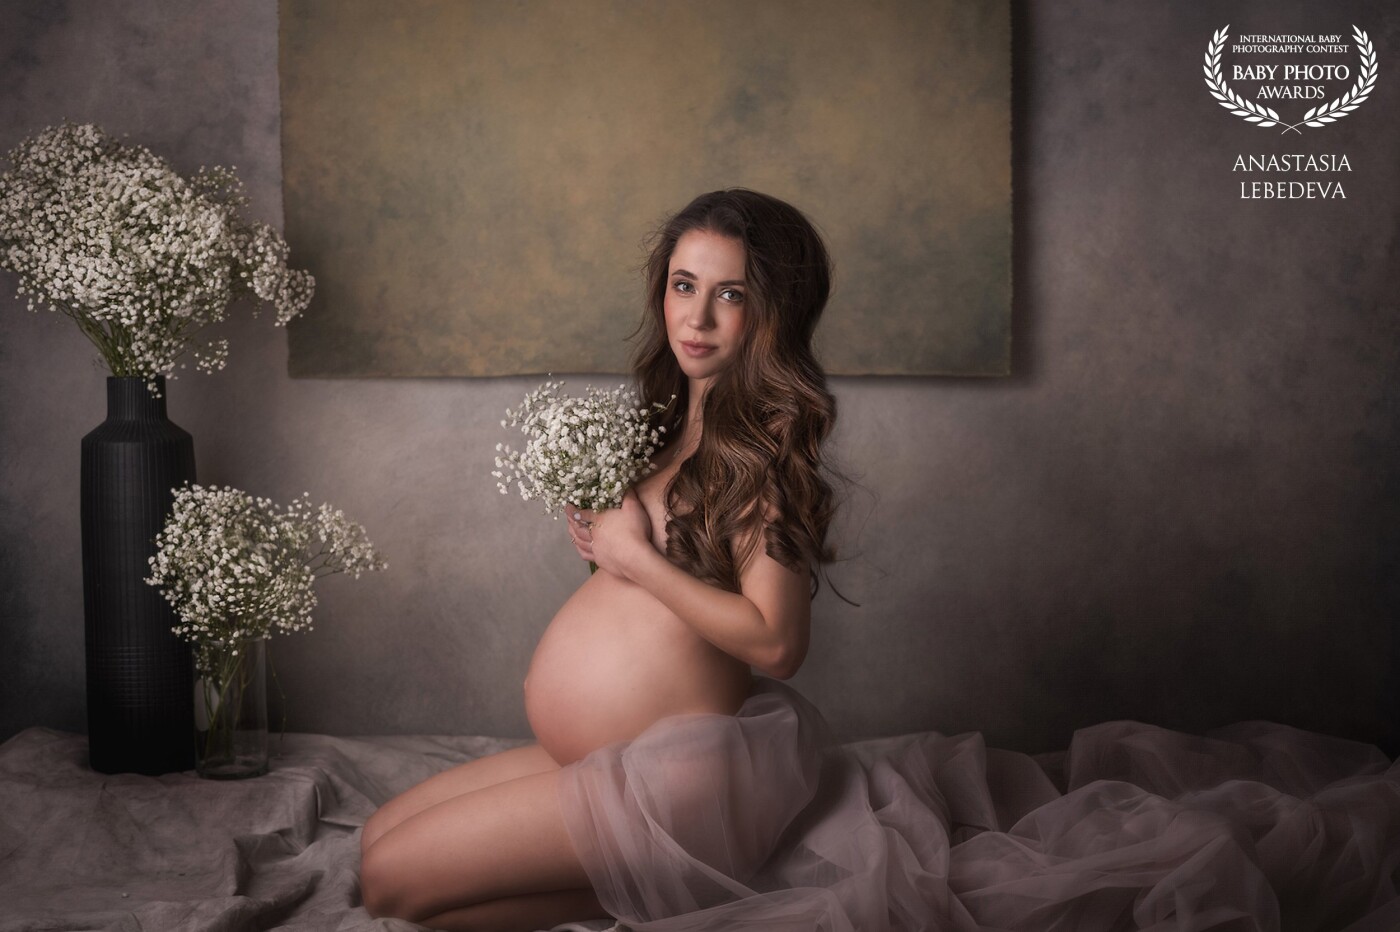 Wow!!! Thank you. Another one of my works in the 79 collection. Pregnancy adorns any woman, makes her tender and touching. How wonderful it is to be able to capture such a beautiful time in a photograph.